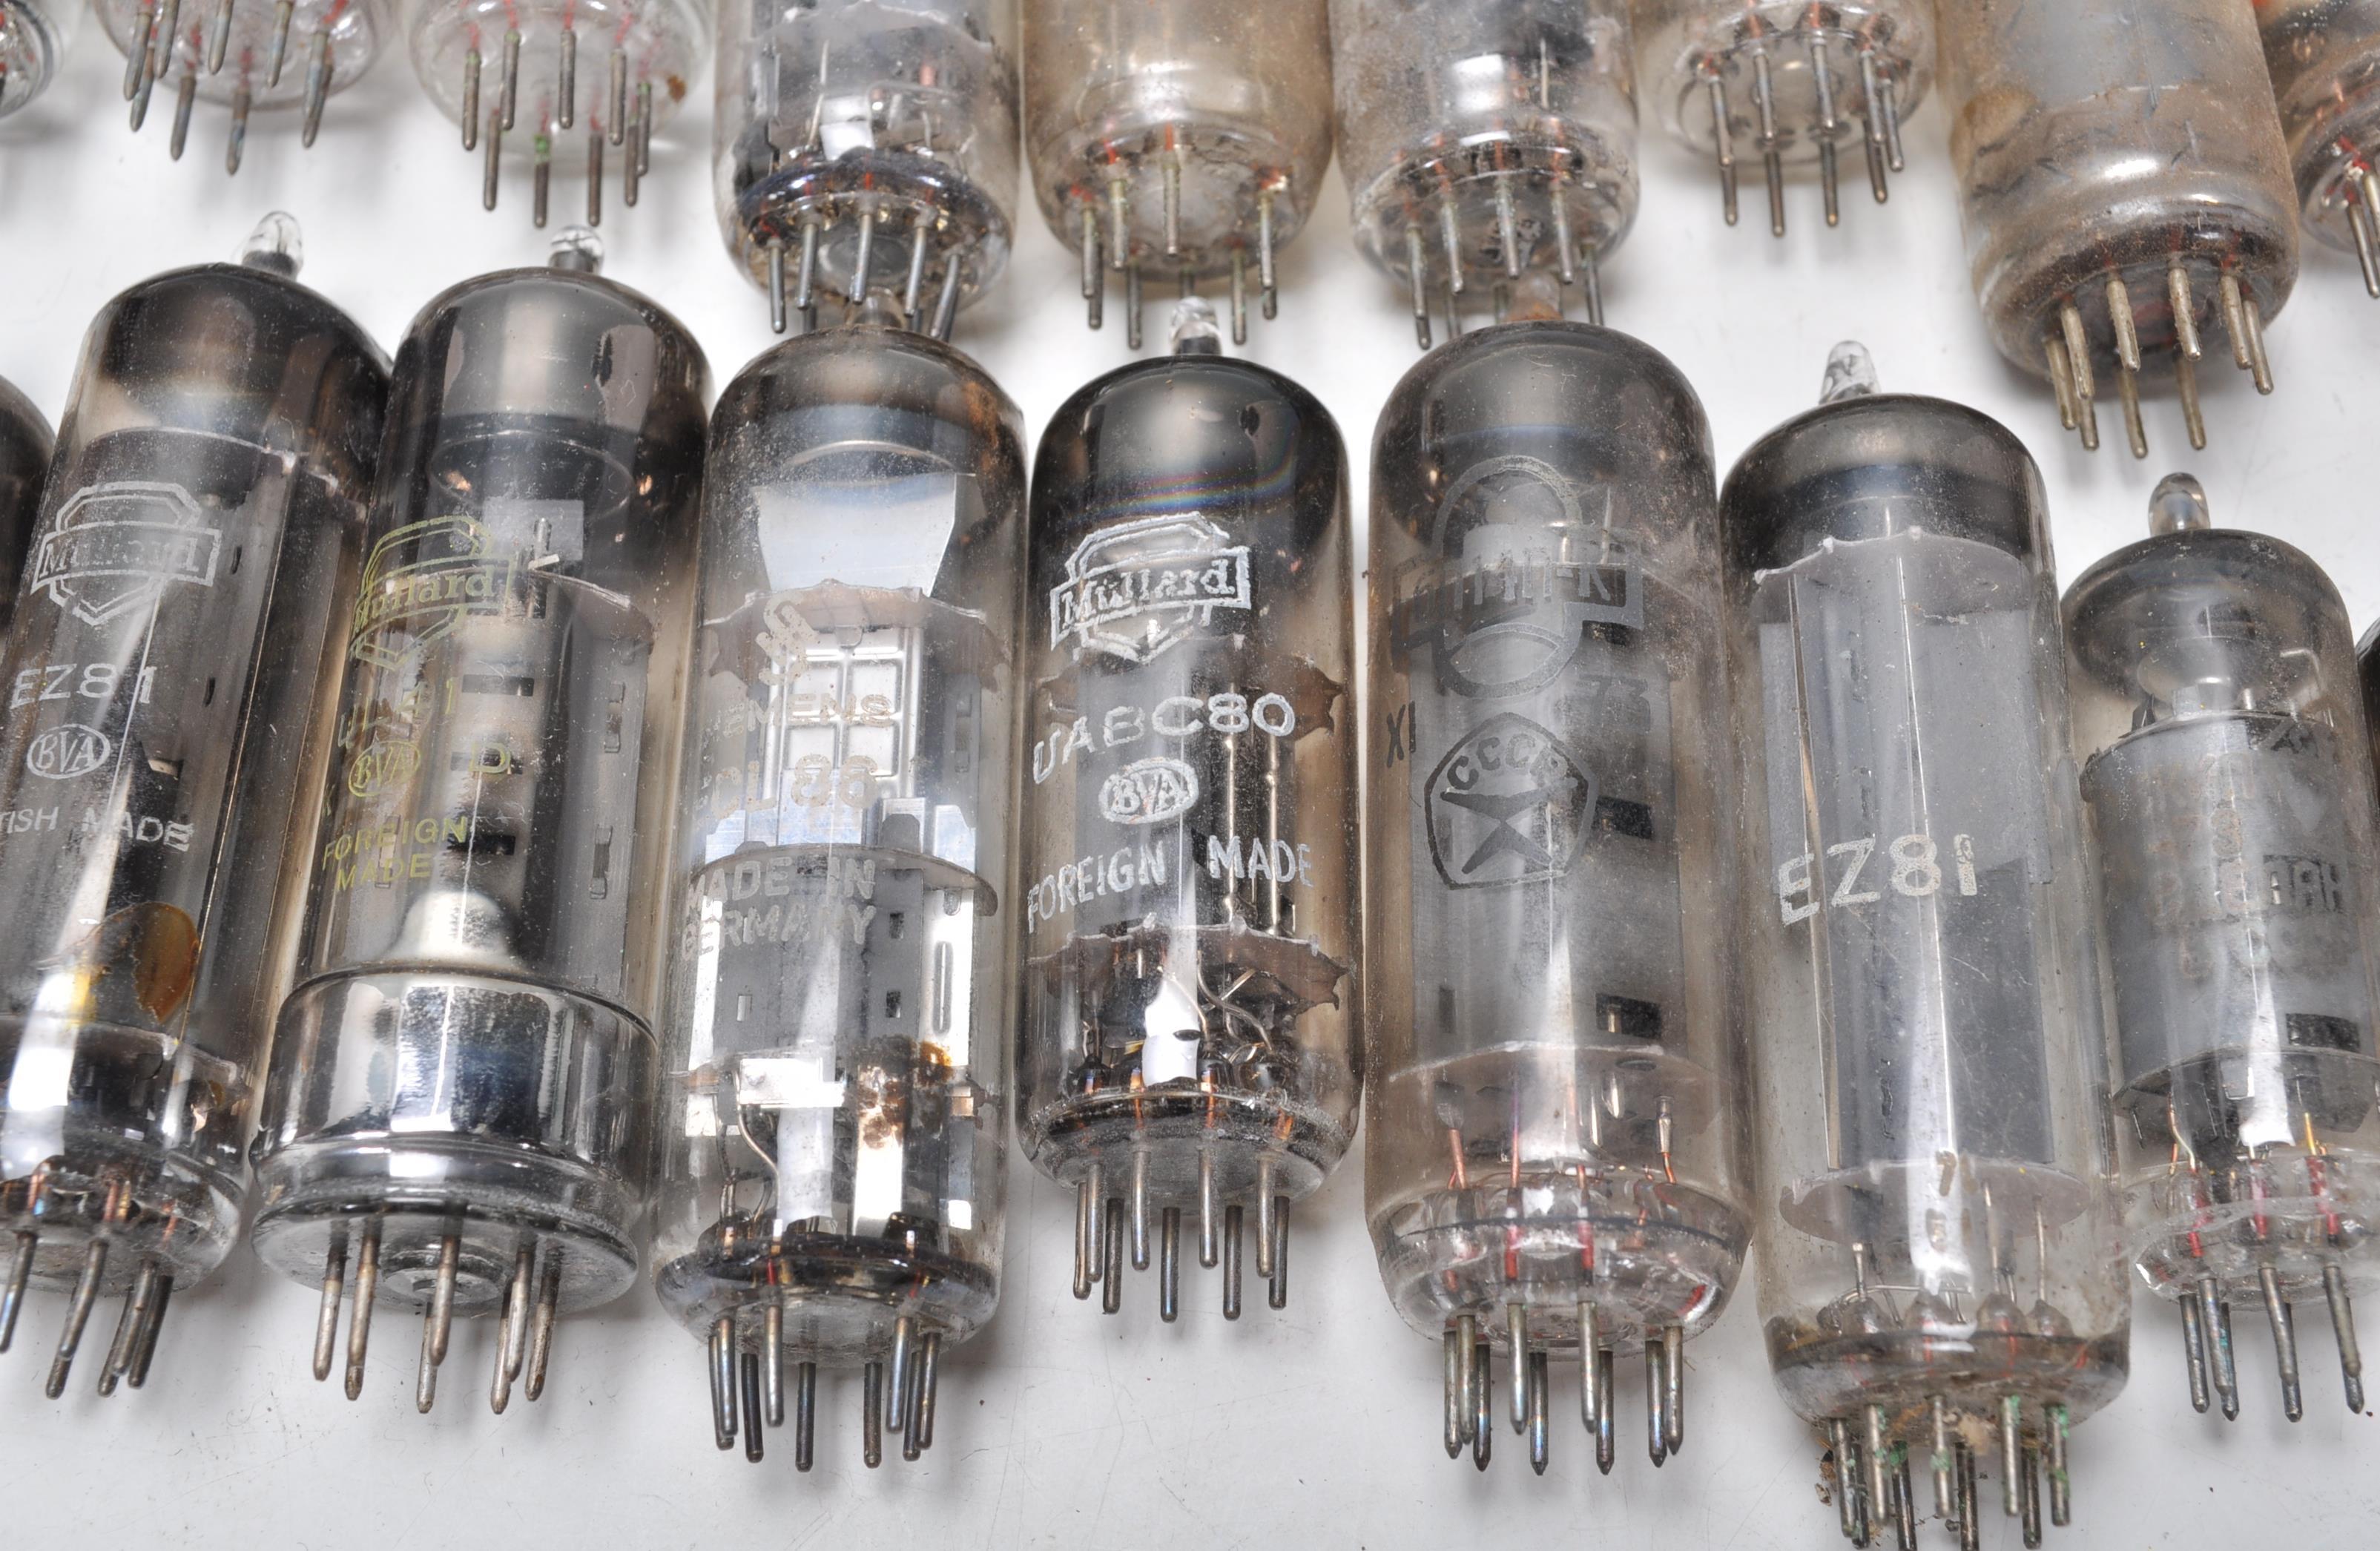 A collection of vintage mixed radio valves to include EC83, EZ81, Ediswate UCH42, Mullard EZ81 - Image 3 of 21